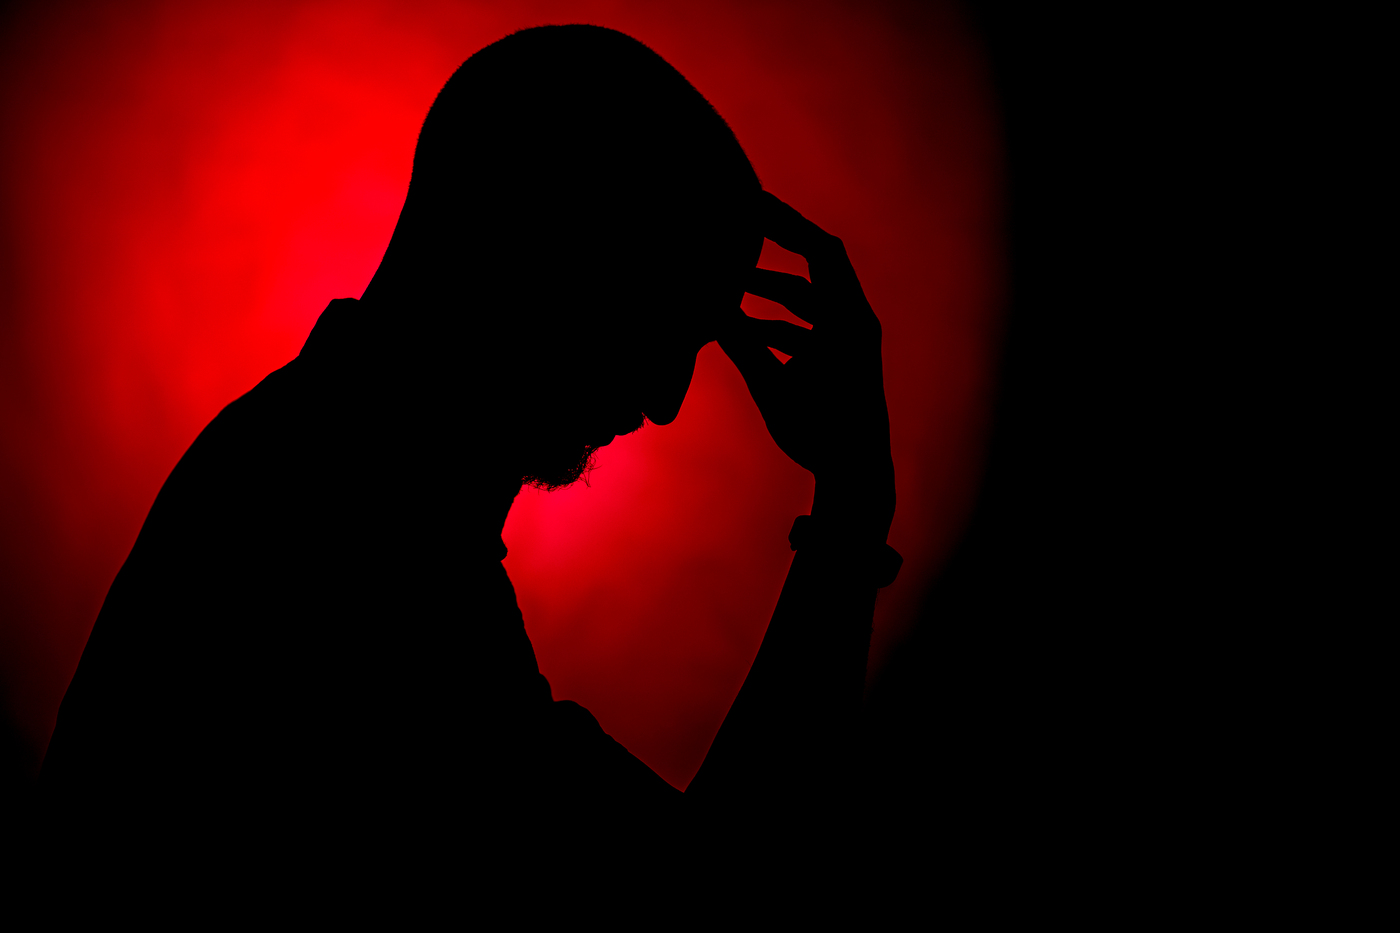 Silhouette of a man with his head lowered